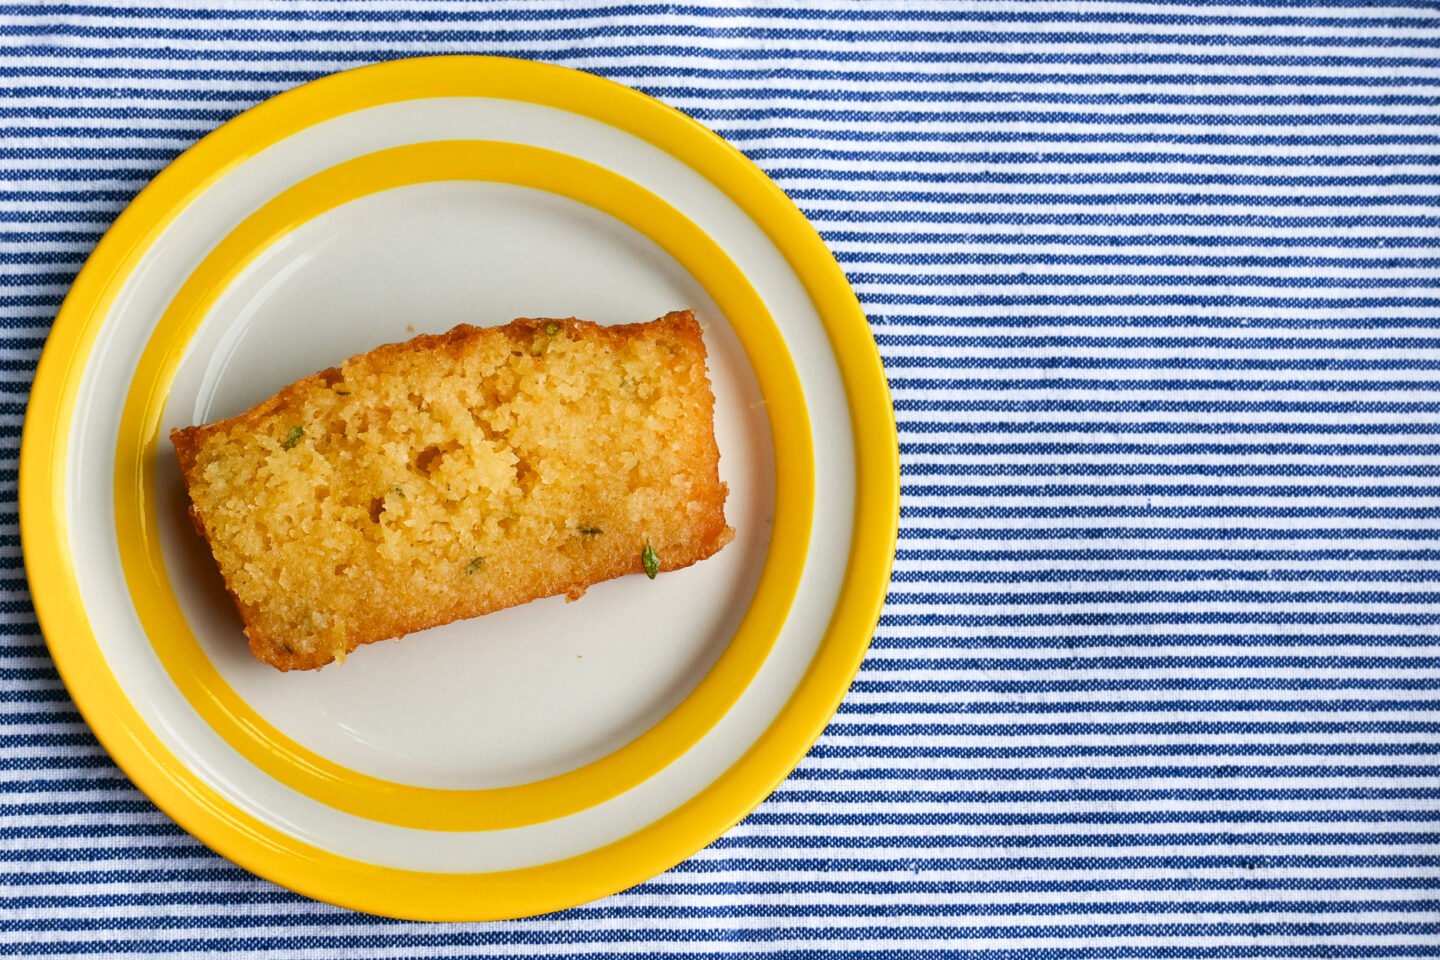 Slice of yellow Lemon & Thyme Loaf Cake on a striped yellow Cornishware dessert plate on a blue & white striped background